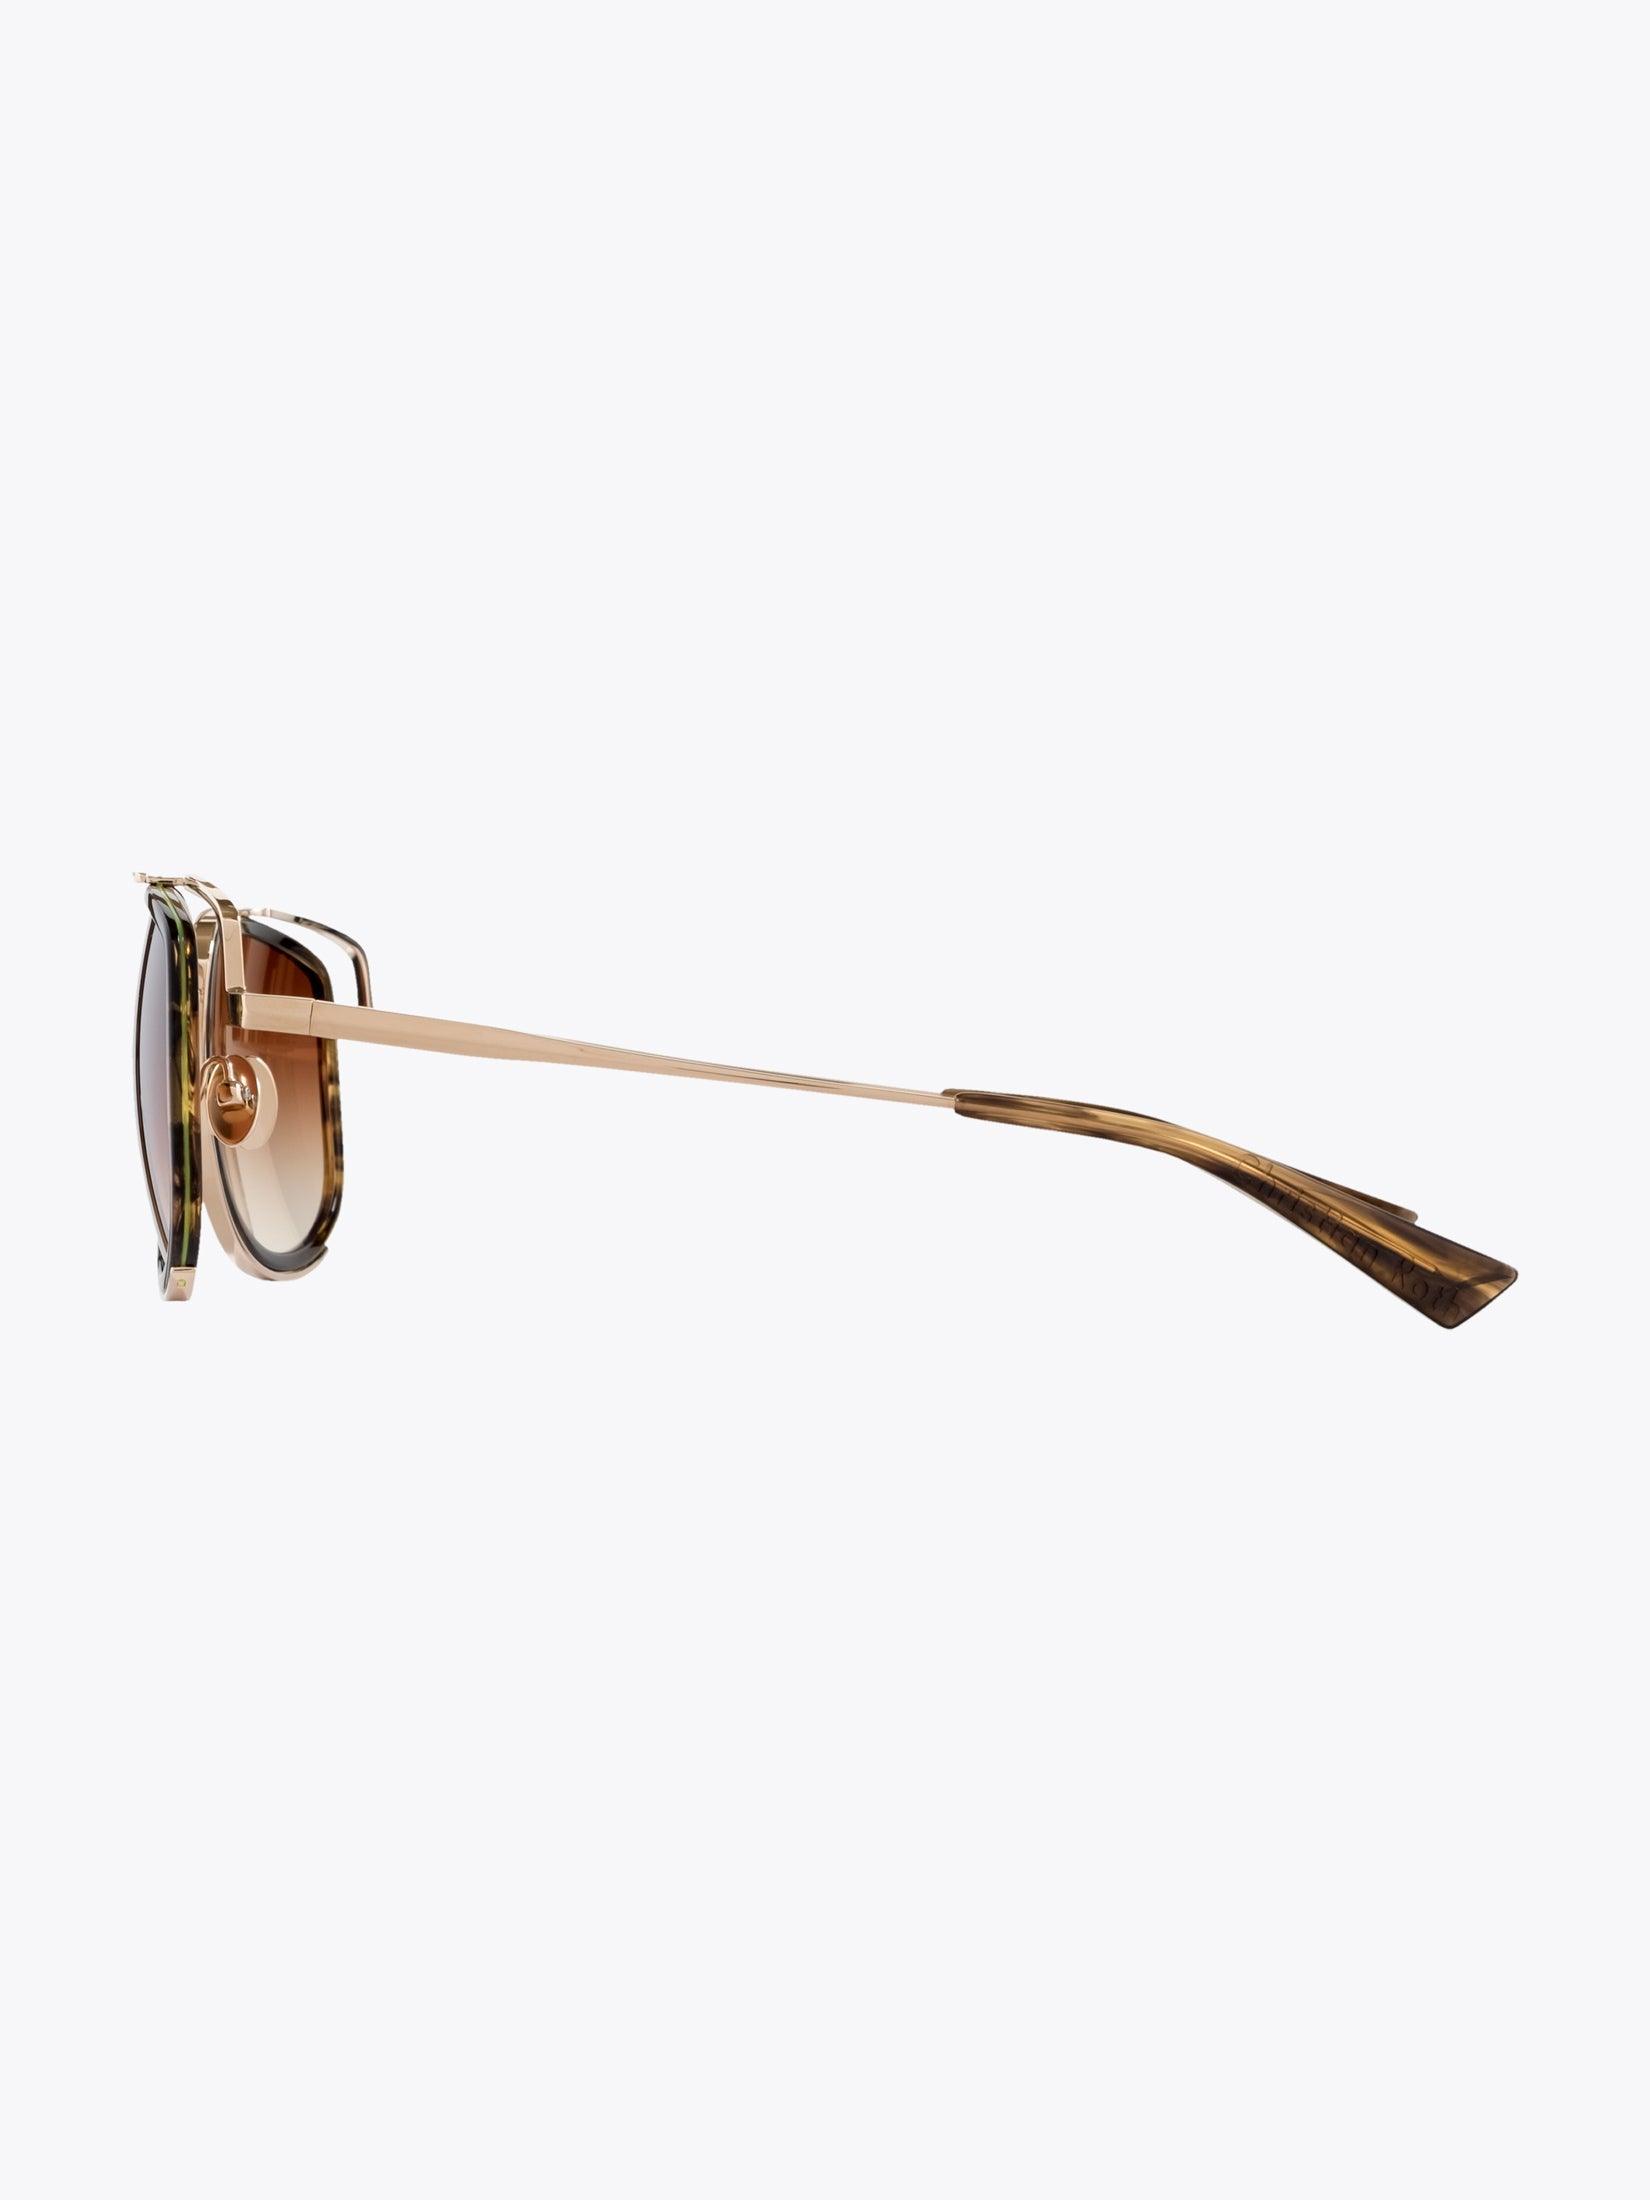 CHRISTIAN ROTH CR-100 Brown/Gold Sunglasses